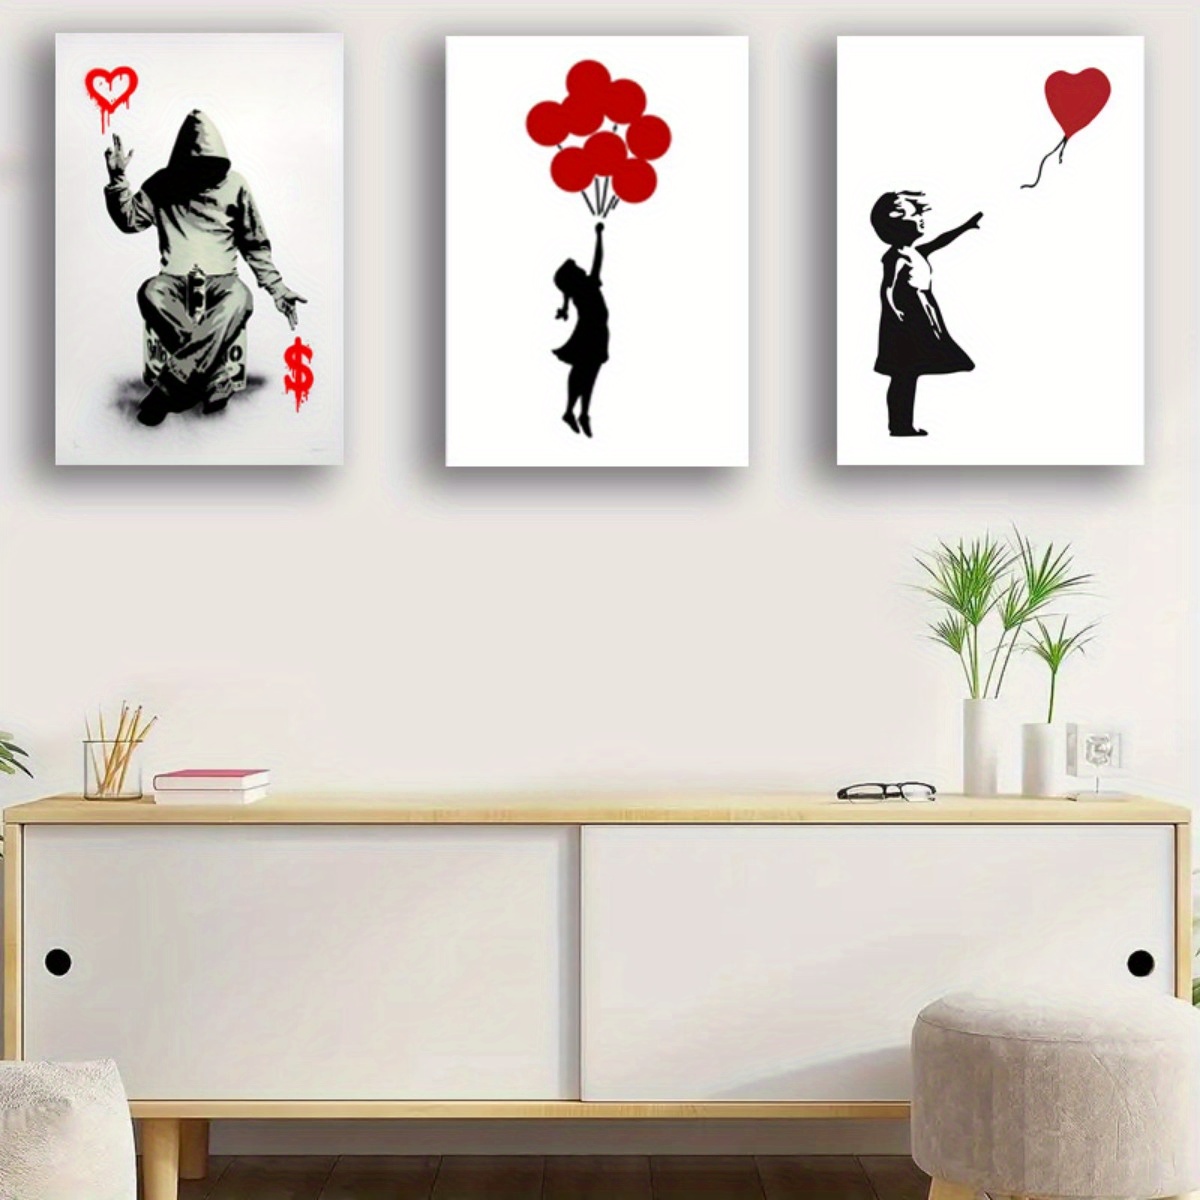 Pyramid America Street Art Poster - Banksy Flowers On Film - 11 x 17 Poster  Print Wall Art, Ideal for Bedroom Decor, Home Decor, Office Decor